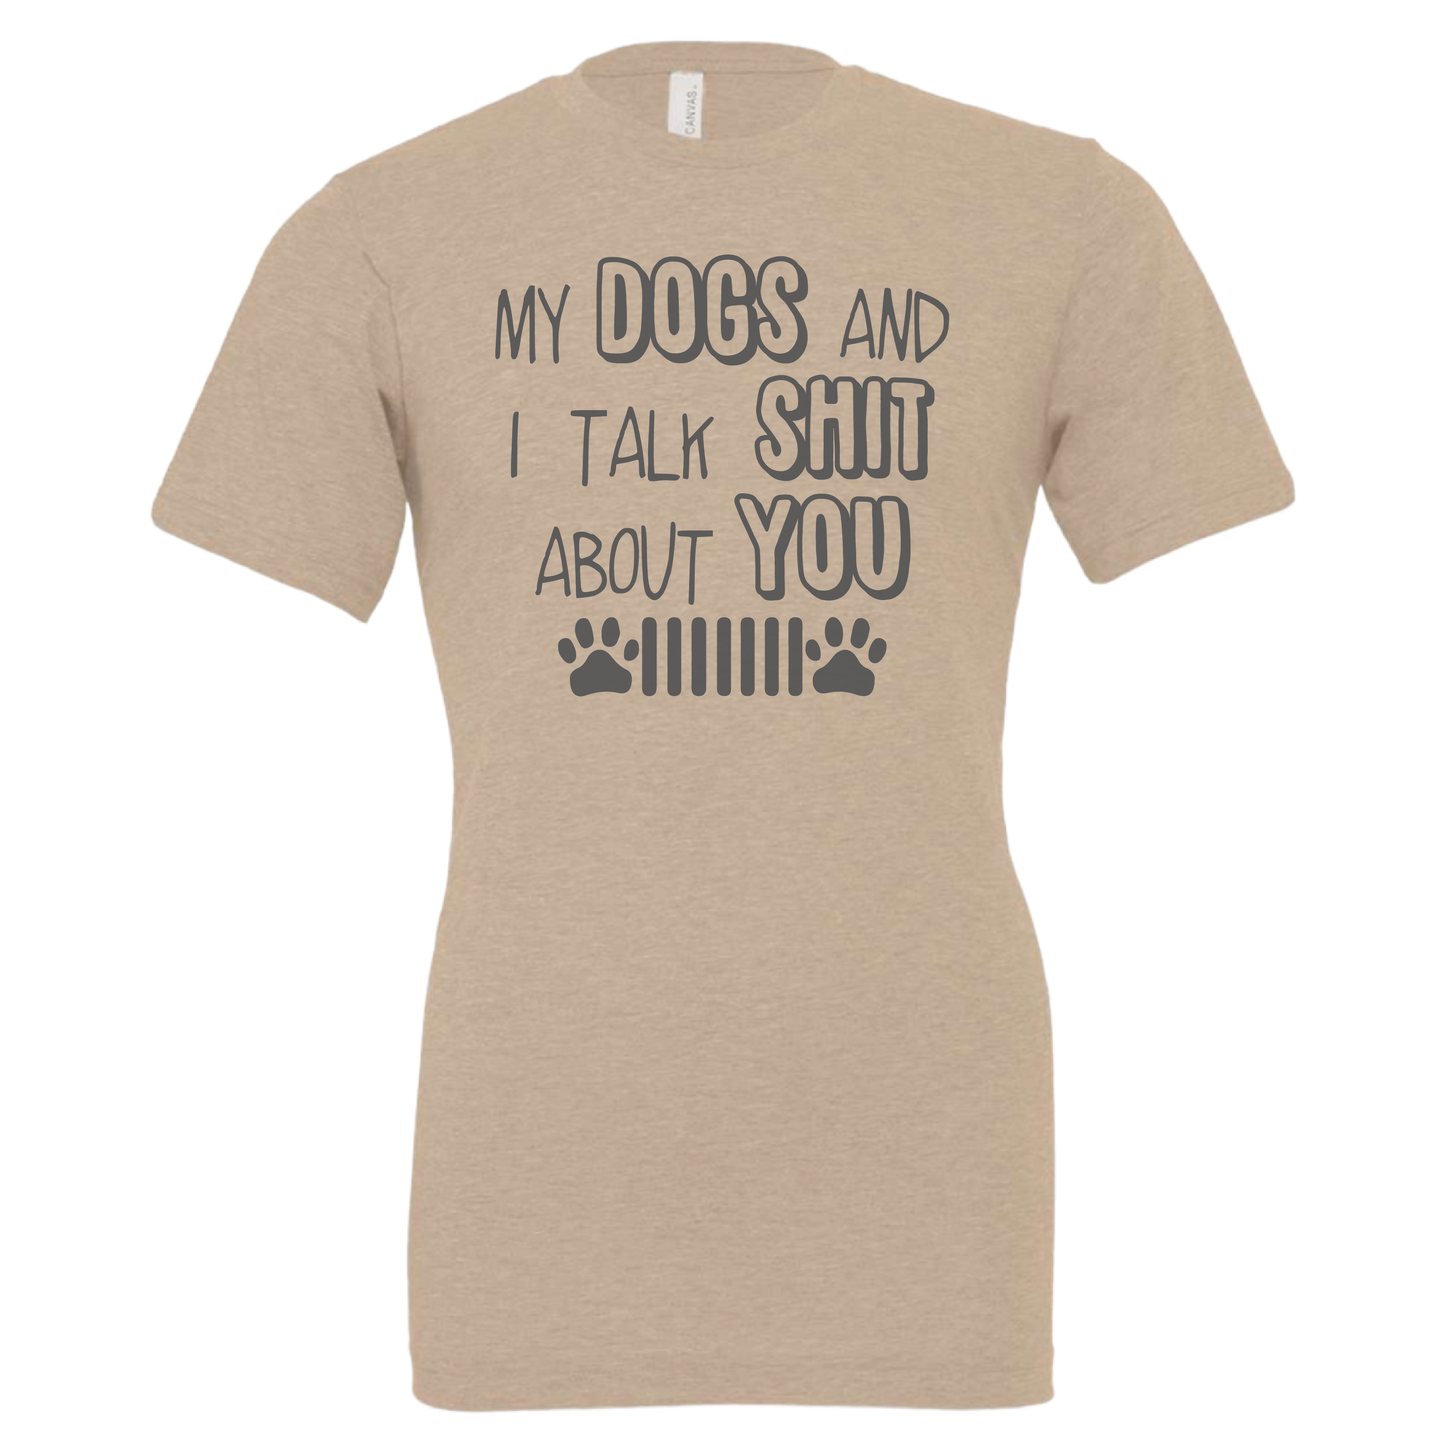 Talk Shit - Shirt, Tank Top, Long Sleeve or Hoodie - Available in Multiple Colors